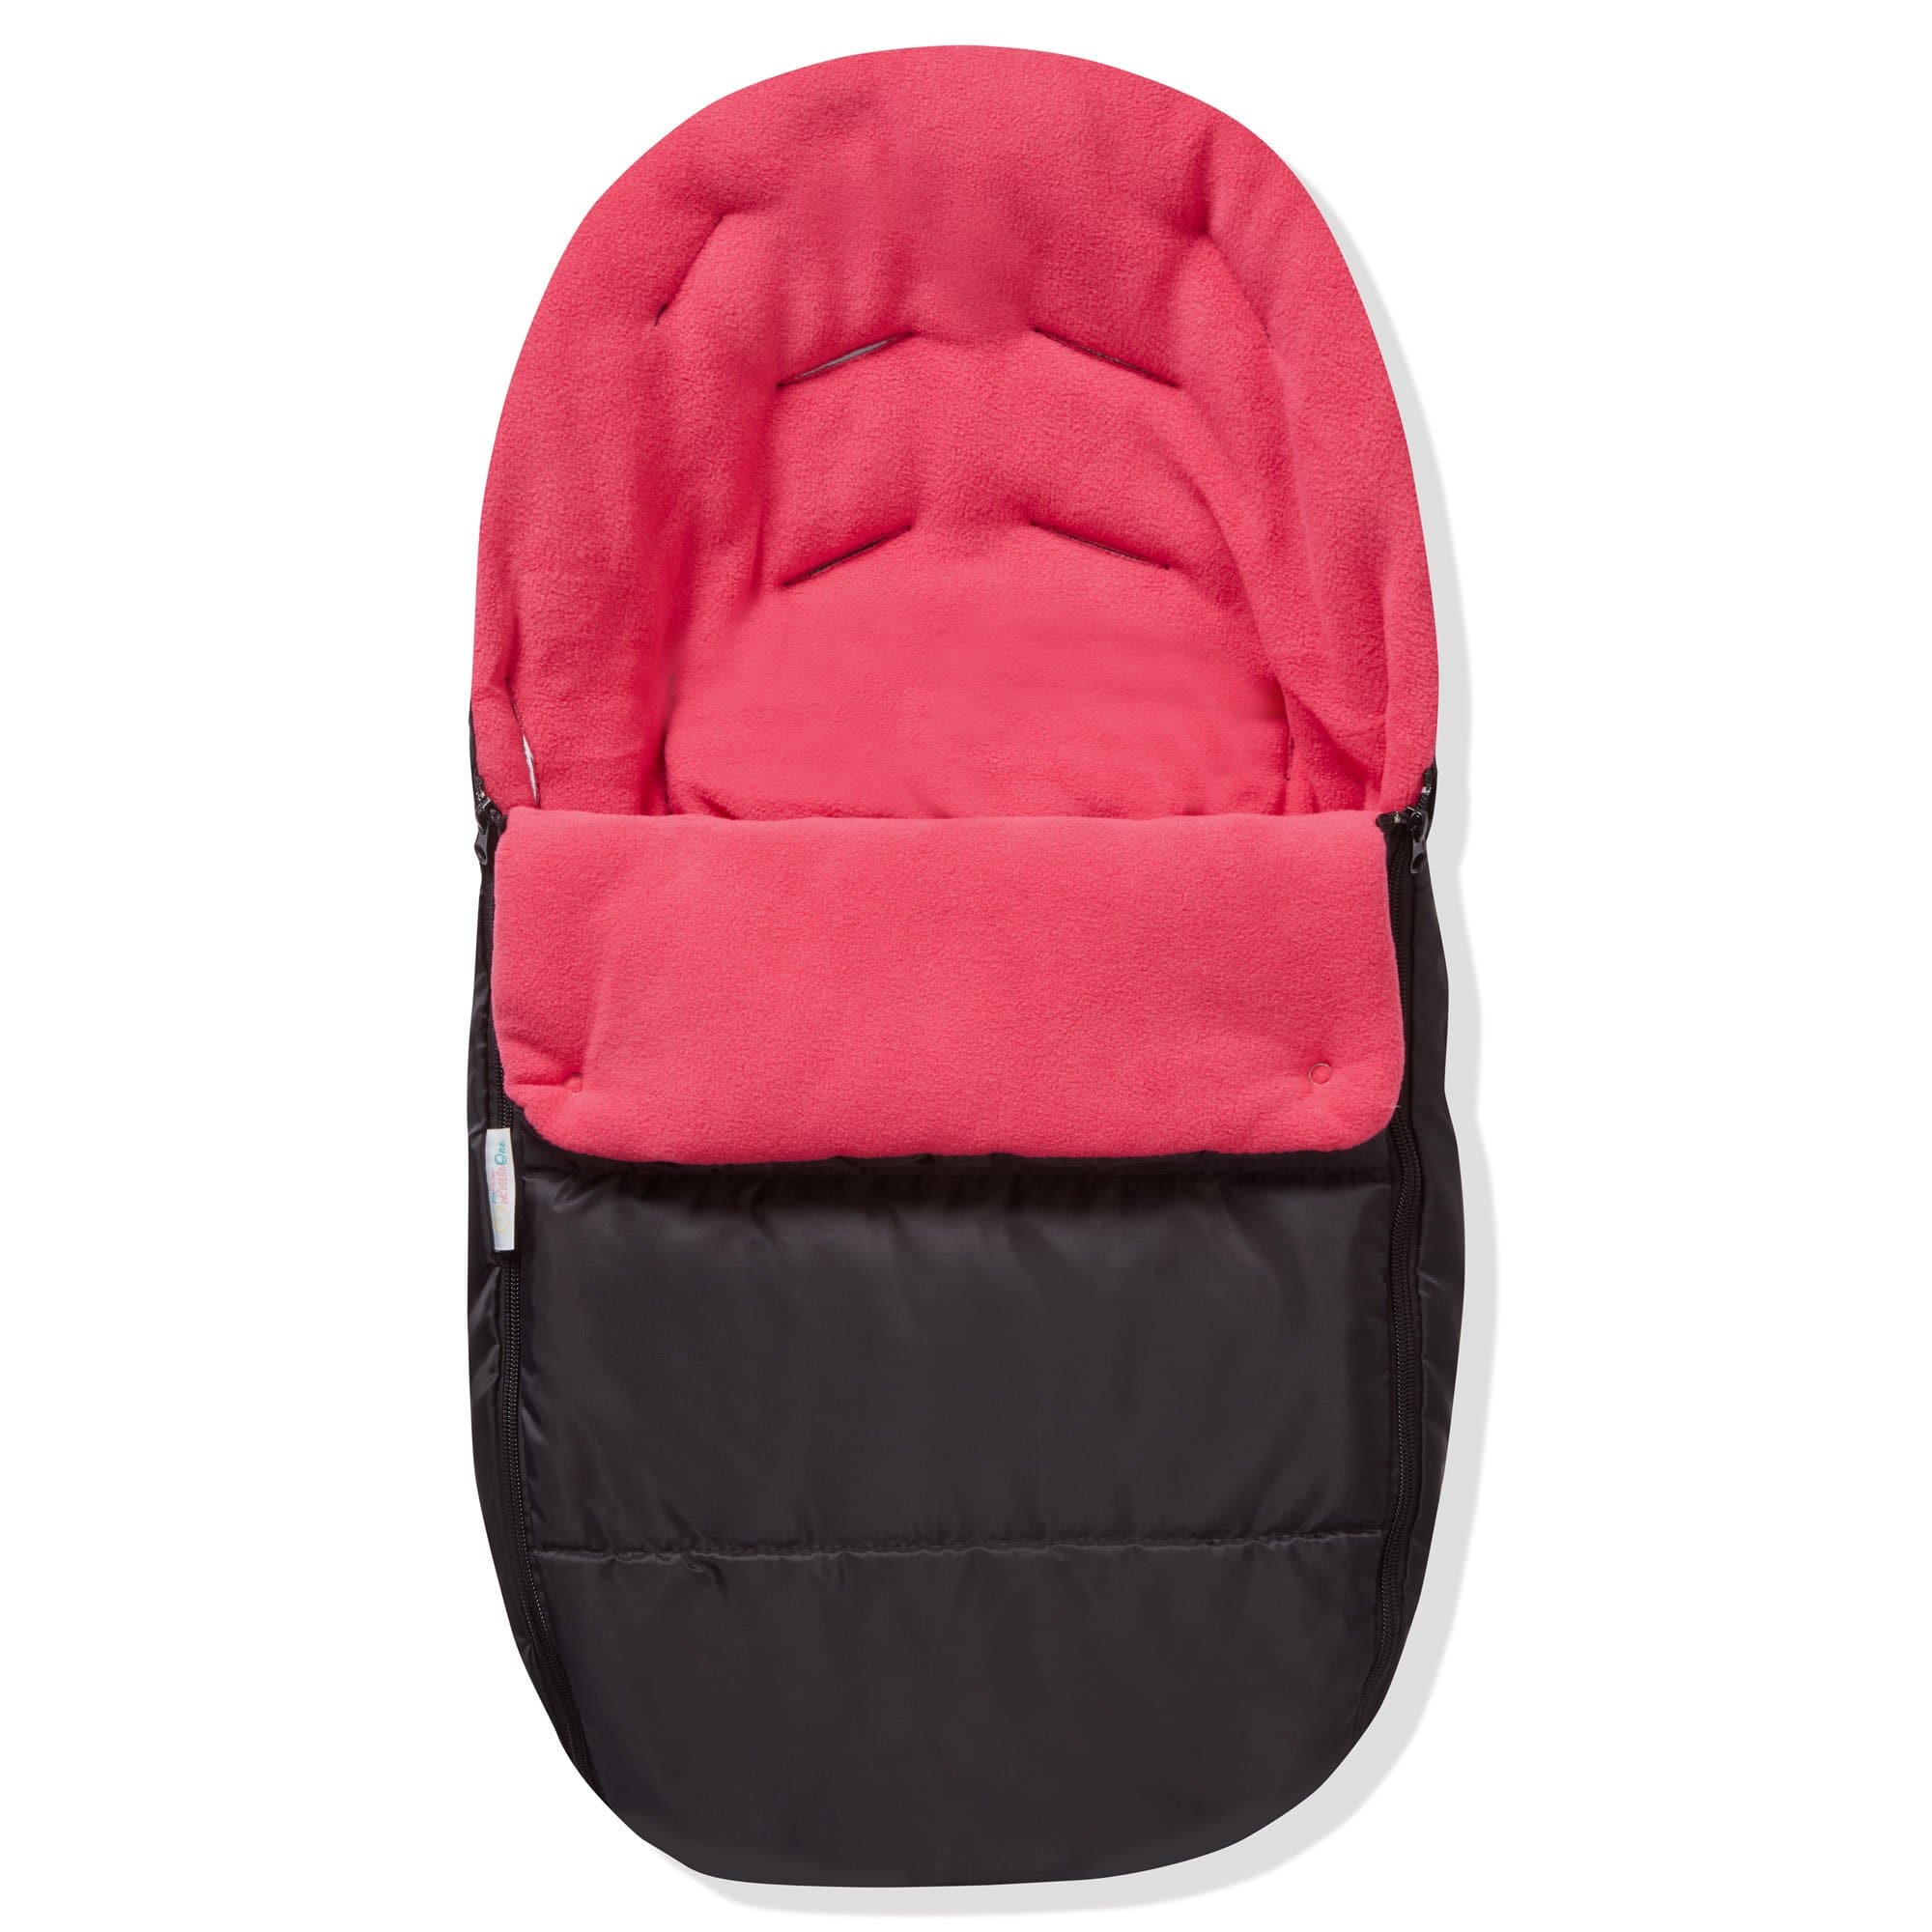 Premium Car Seat Footmuff / Cosy Toes Compatible with Phil & Teds - Pink Rose / Fits All Models | For Your Little One